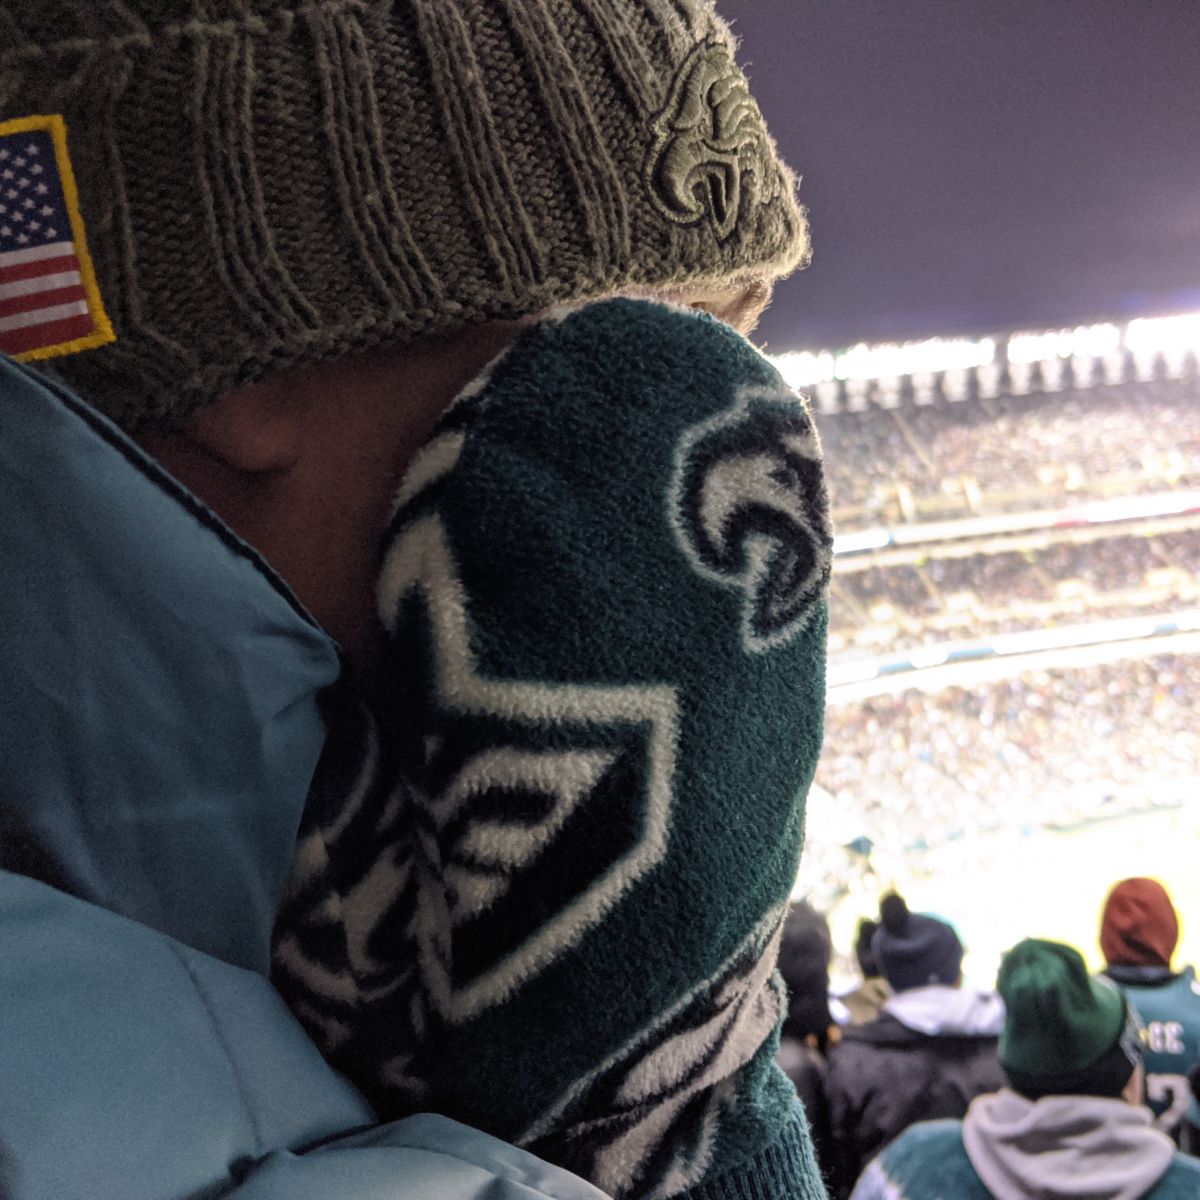 Cold guy at Eagles game wearing hat and mittens